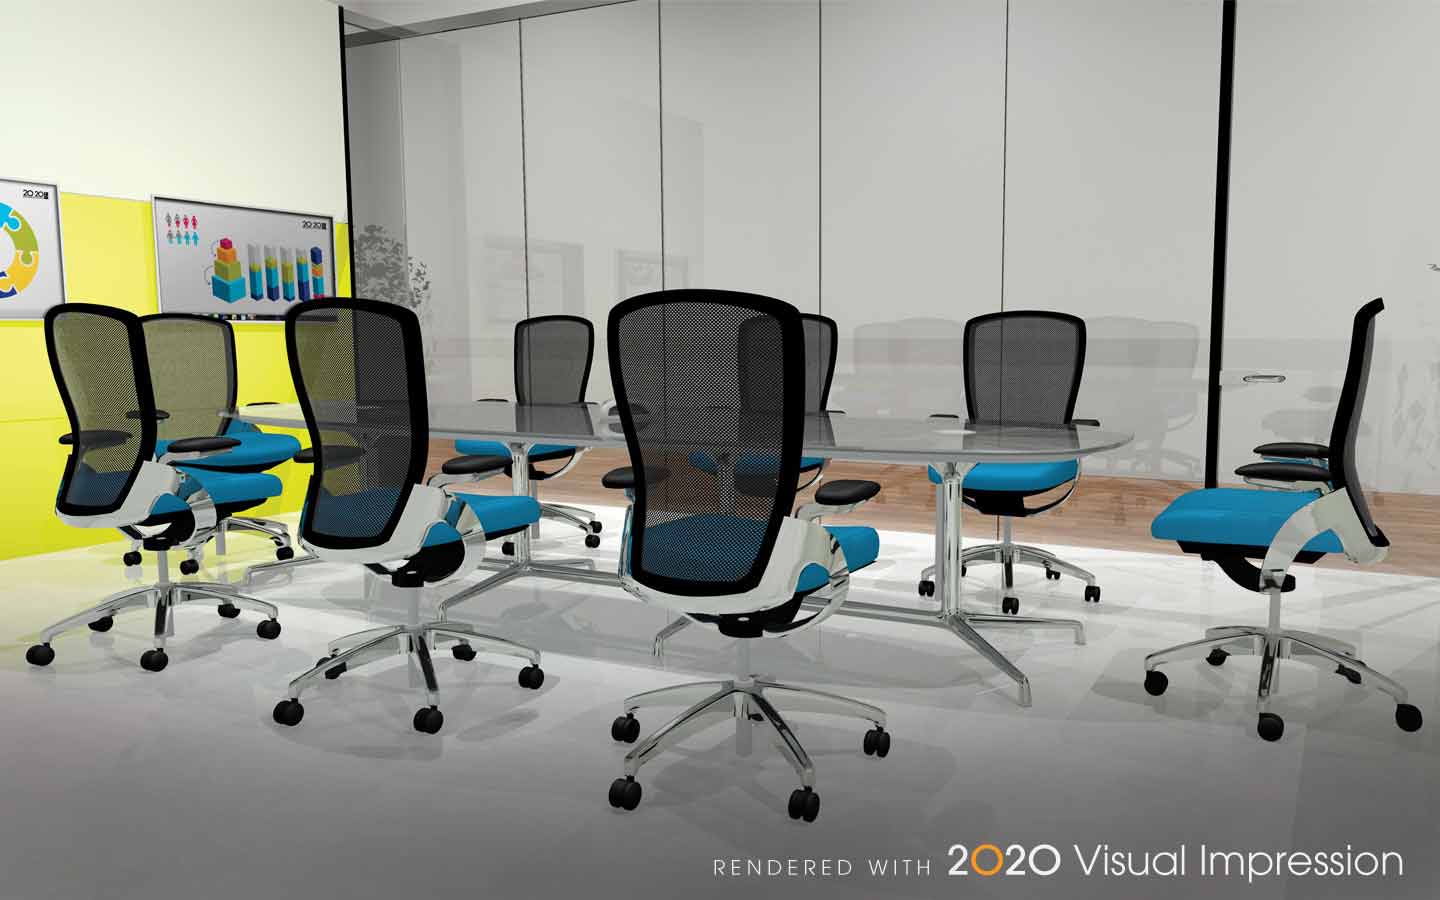 2020 Office, 2020 Visual Impression, 2020 Visual Impression Rendering, Office Space Planning, Office design software, Office Visualization Software